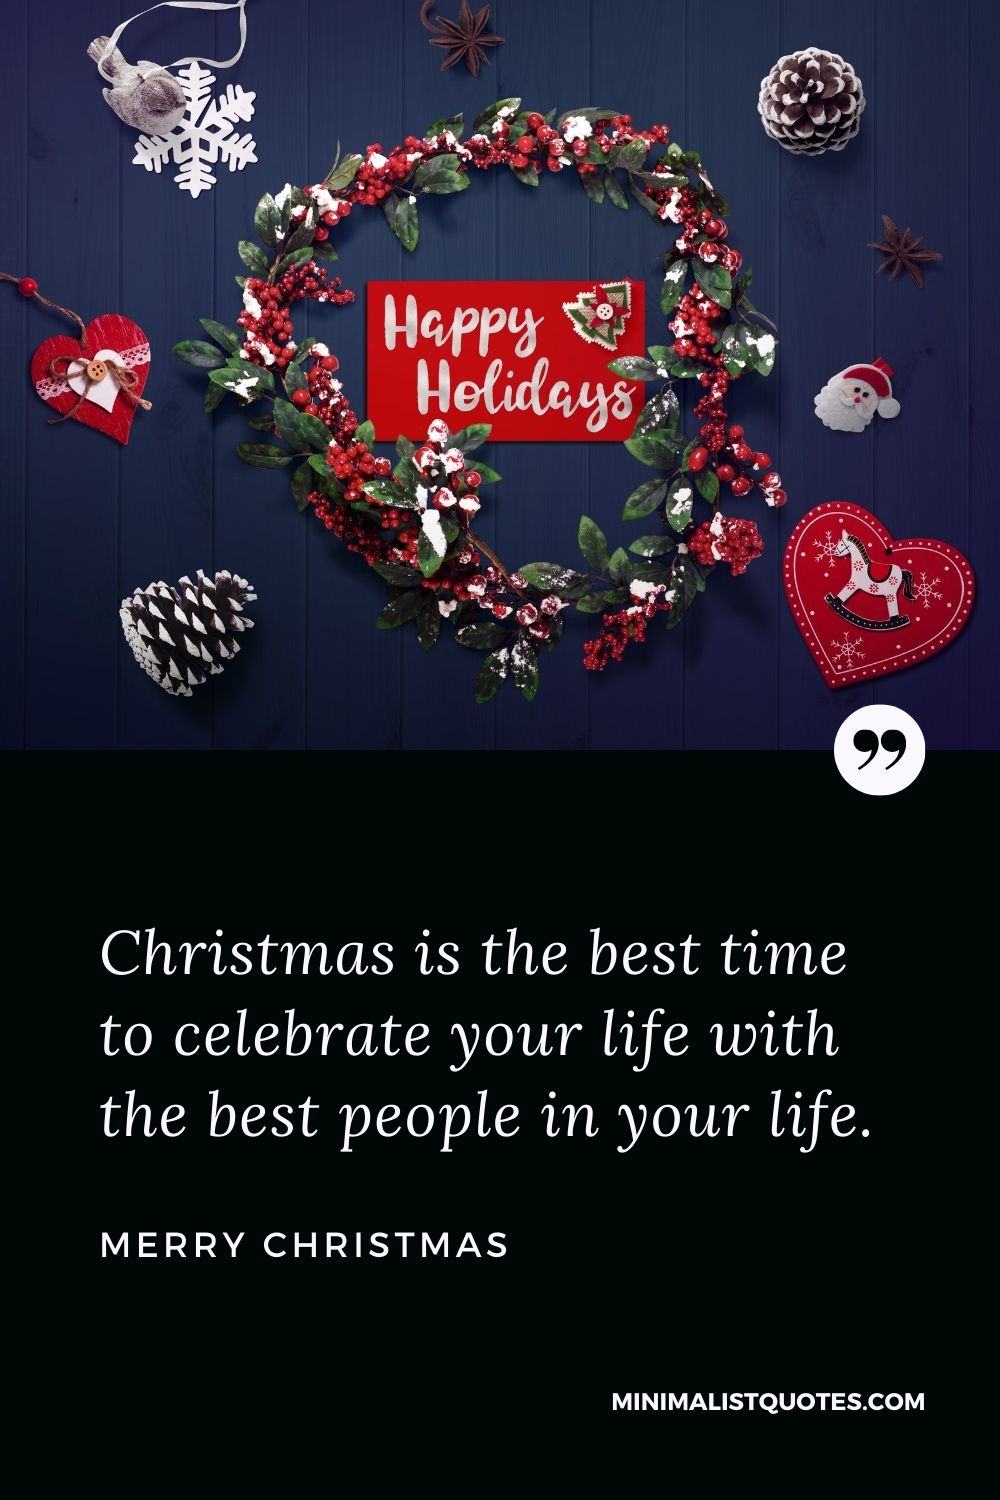 Merry Christmas Wish - Christmas is the best time to celebrate your life with the best people in your life.